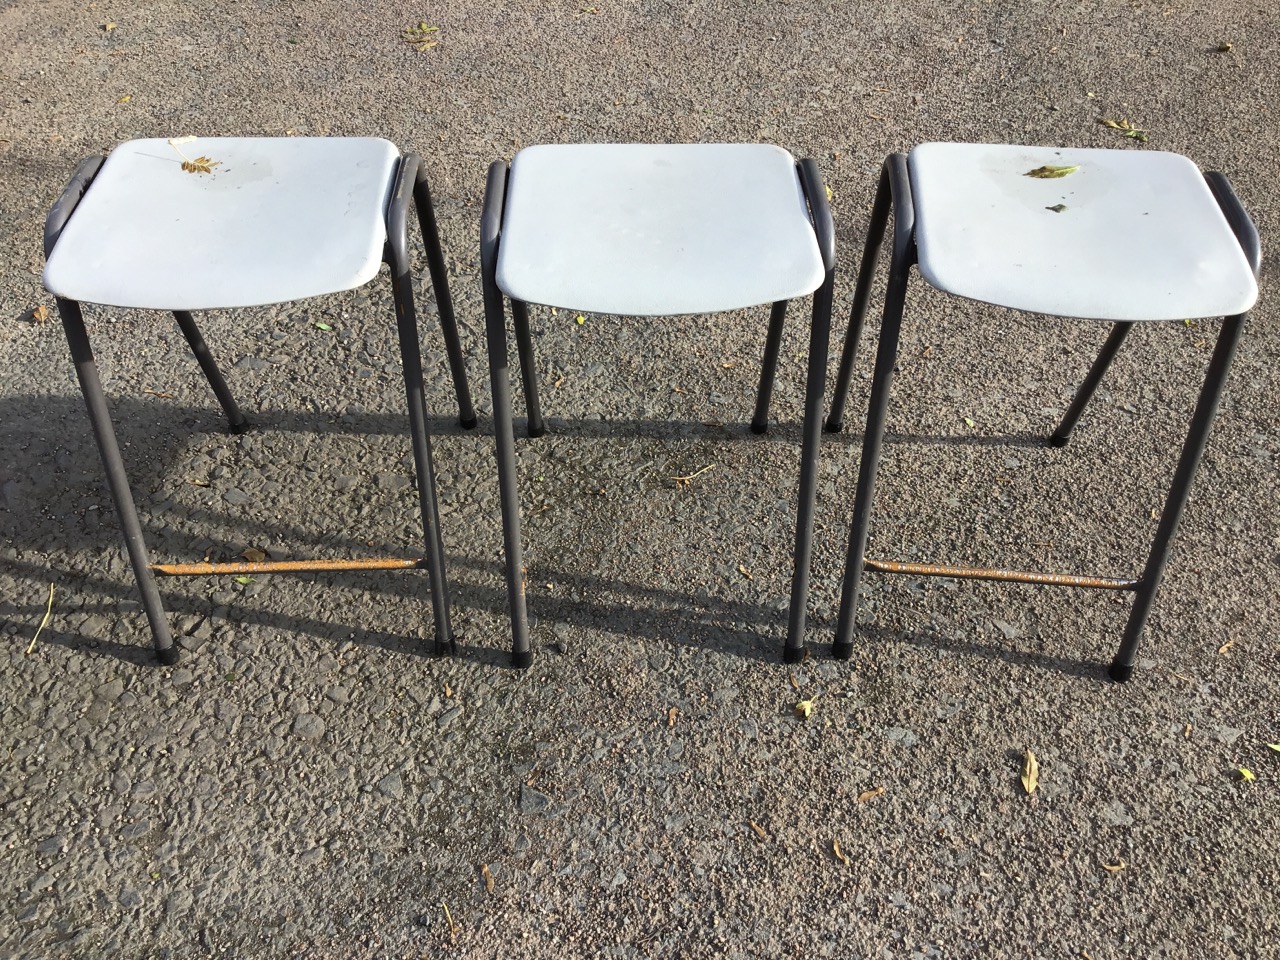 22 modern plastic seated stools, the seats on angled tubular metal legs with cappings. (22) - Image 2 of 3